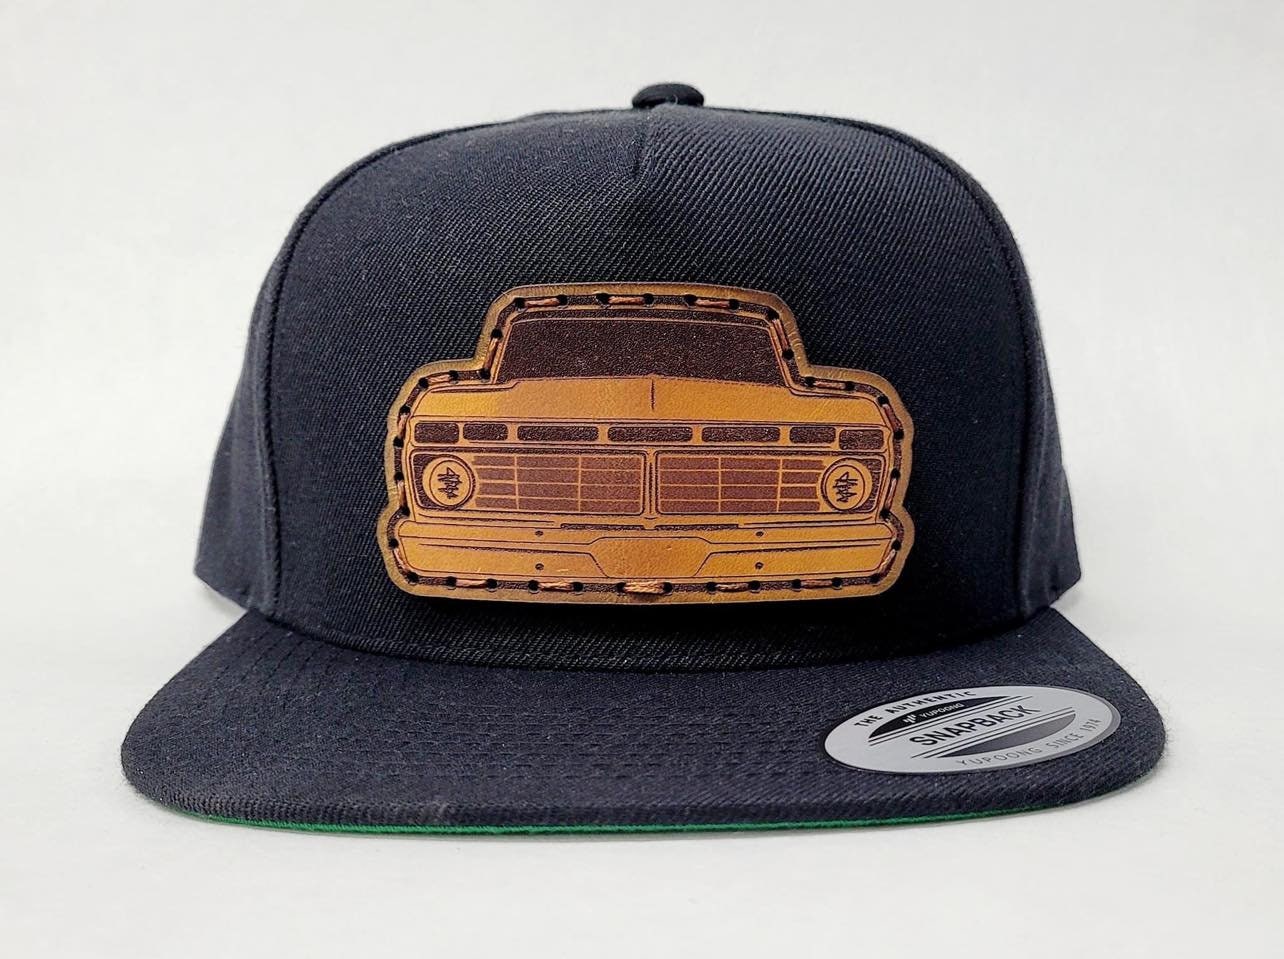 Hand-Sewn Leather Patch Snapback Hat - FORD F100 Design by Oklahoma Customs - Flat Bill, Wool Blend - Perfect Gift for Car Enthusiasts